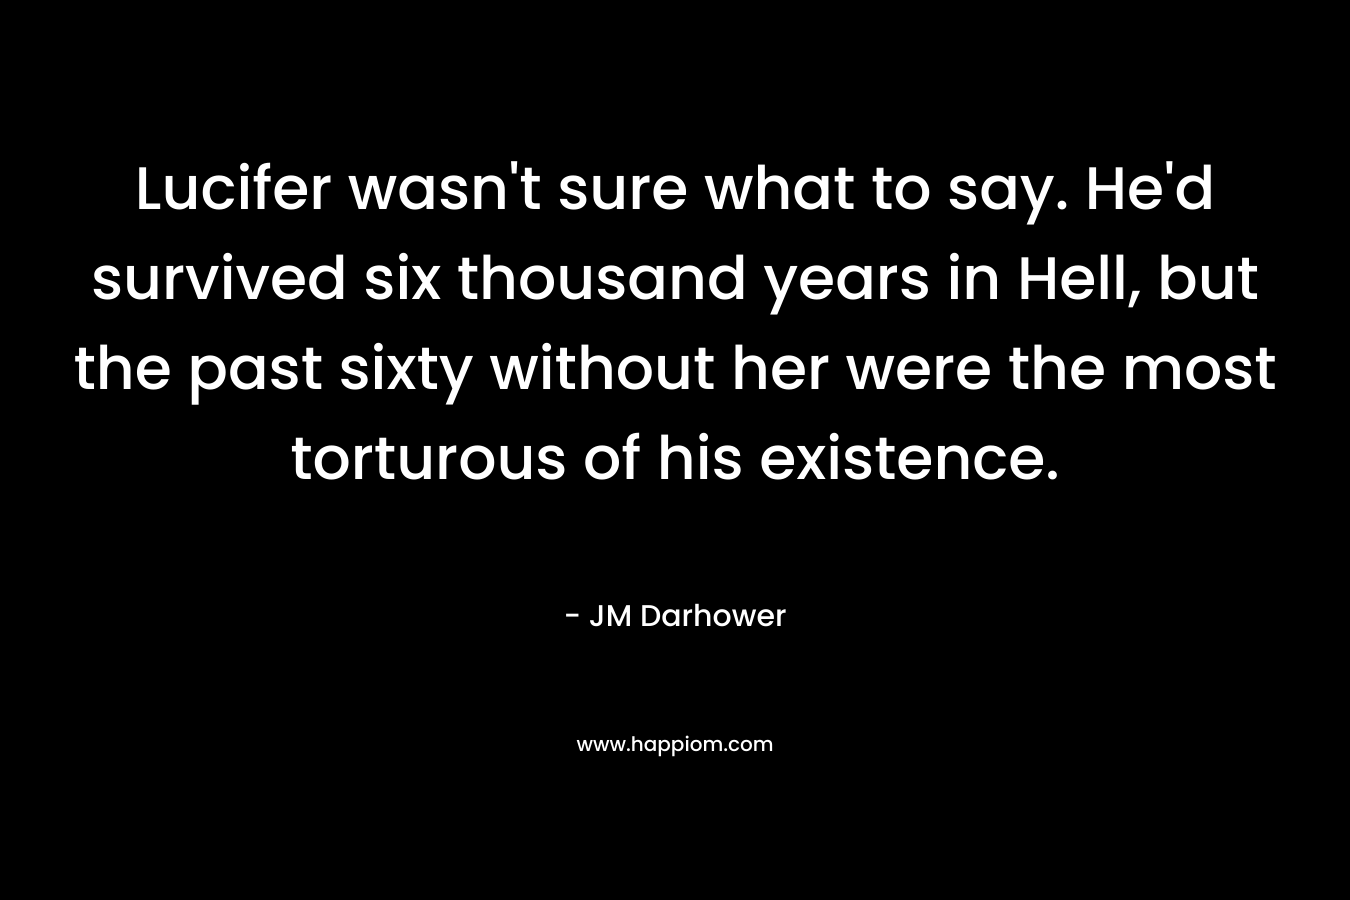 Lucifer wasn’t sure what to say. He’d survived six thousand years in Hell, but the past sixty without her were the most torturous of his existence. – JM Darhower